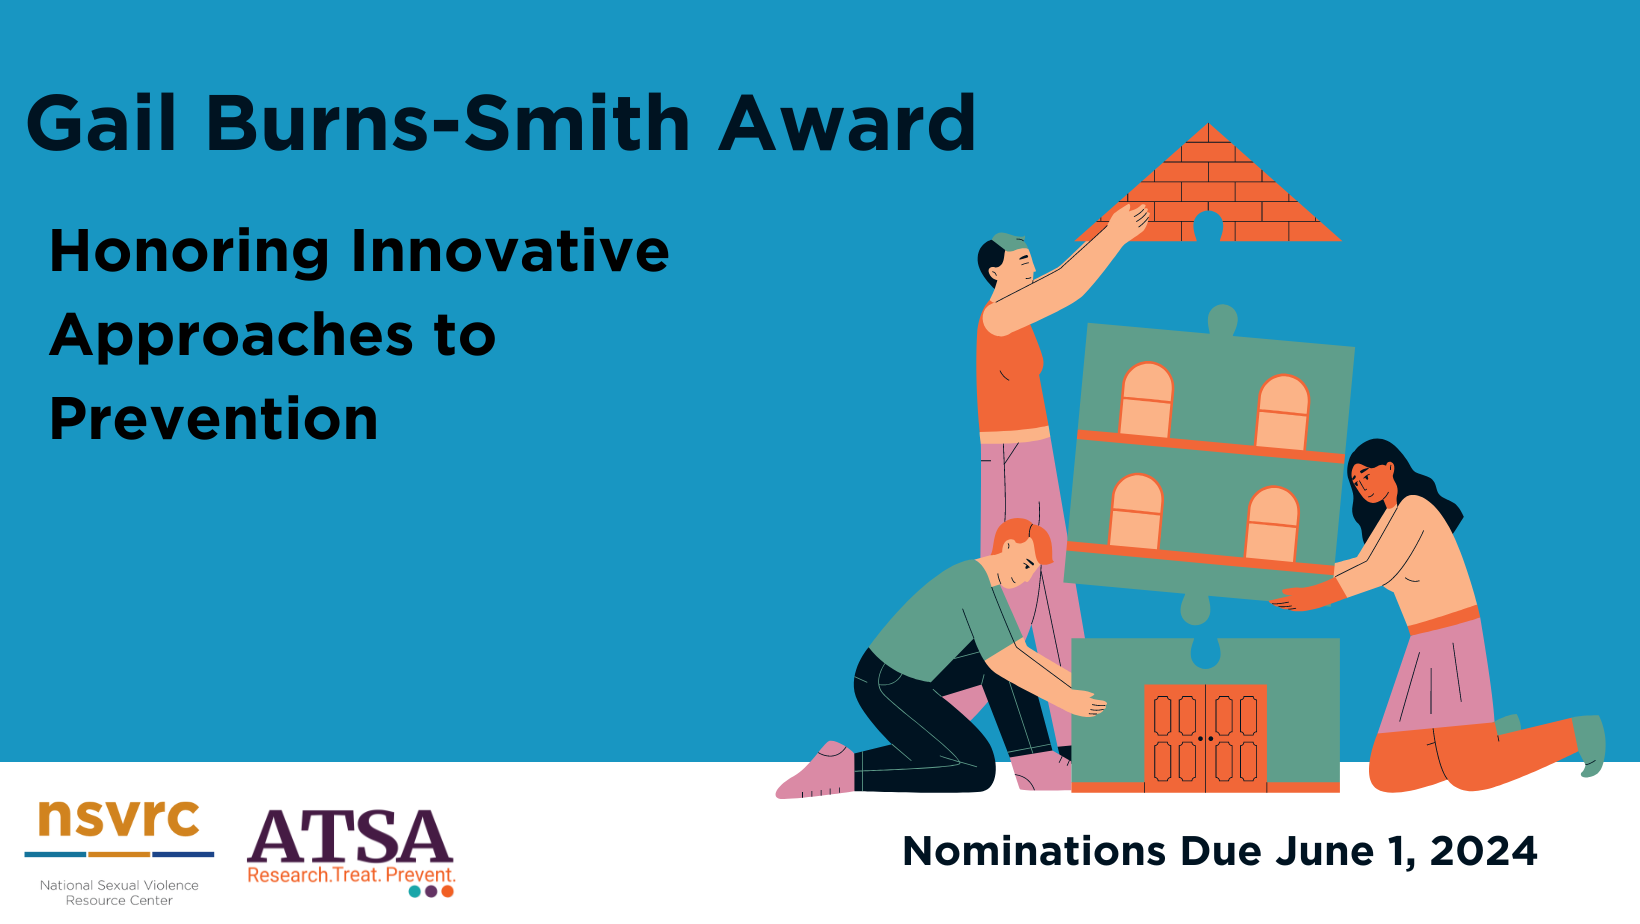 "Gail Burns-Smith Award Honoring Innovative Approaches to Prevention, Nominations Due: June 1, 2024" Animated graphic of three people putting puzzle pieces of a house together. NSVRC and ATSA logos on the bottom.